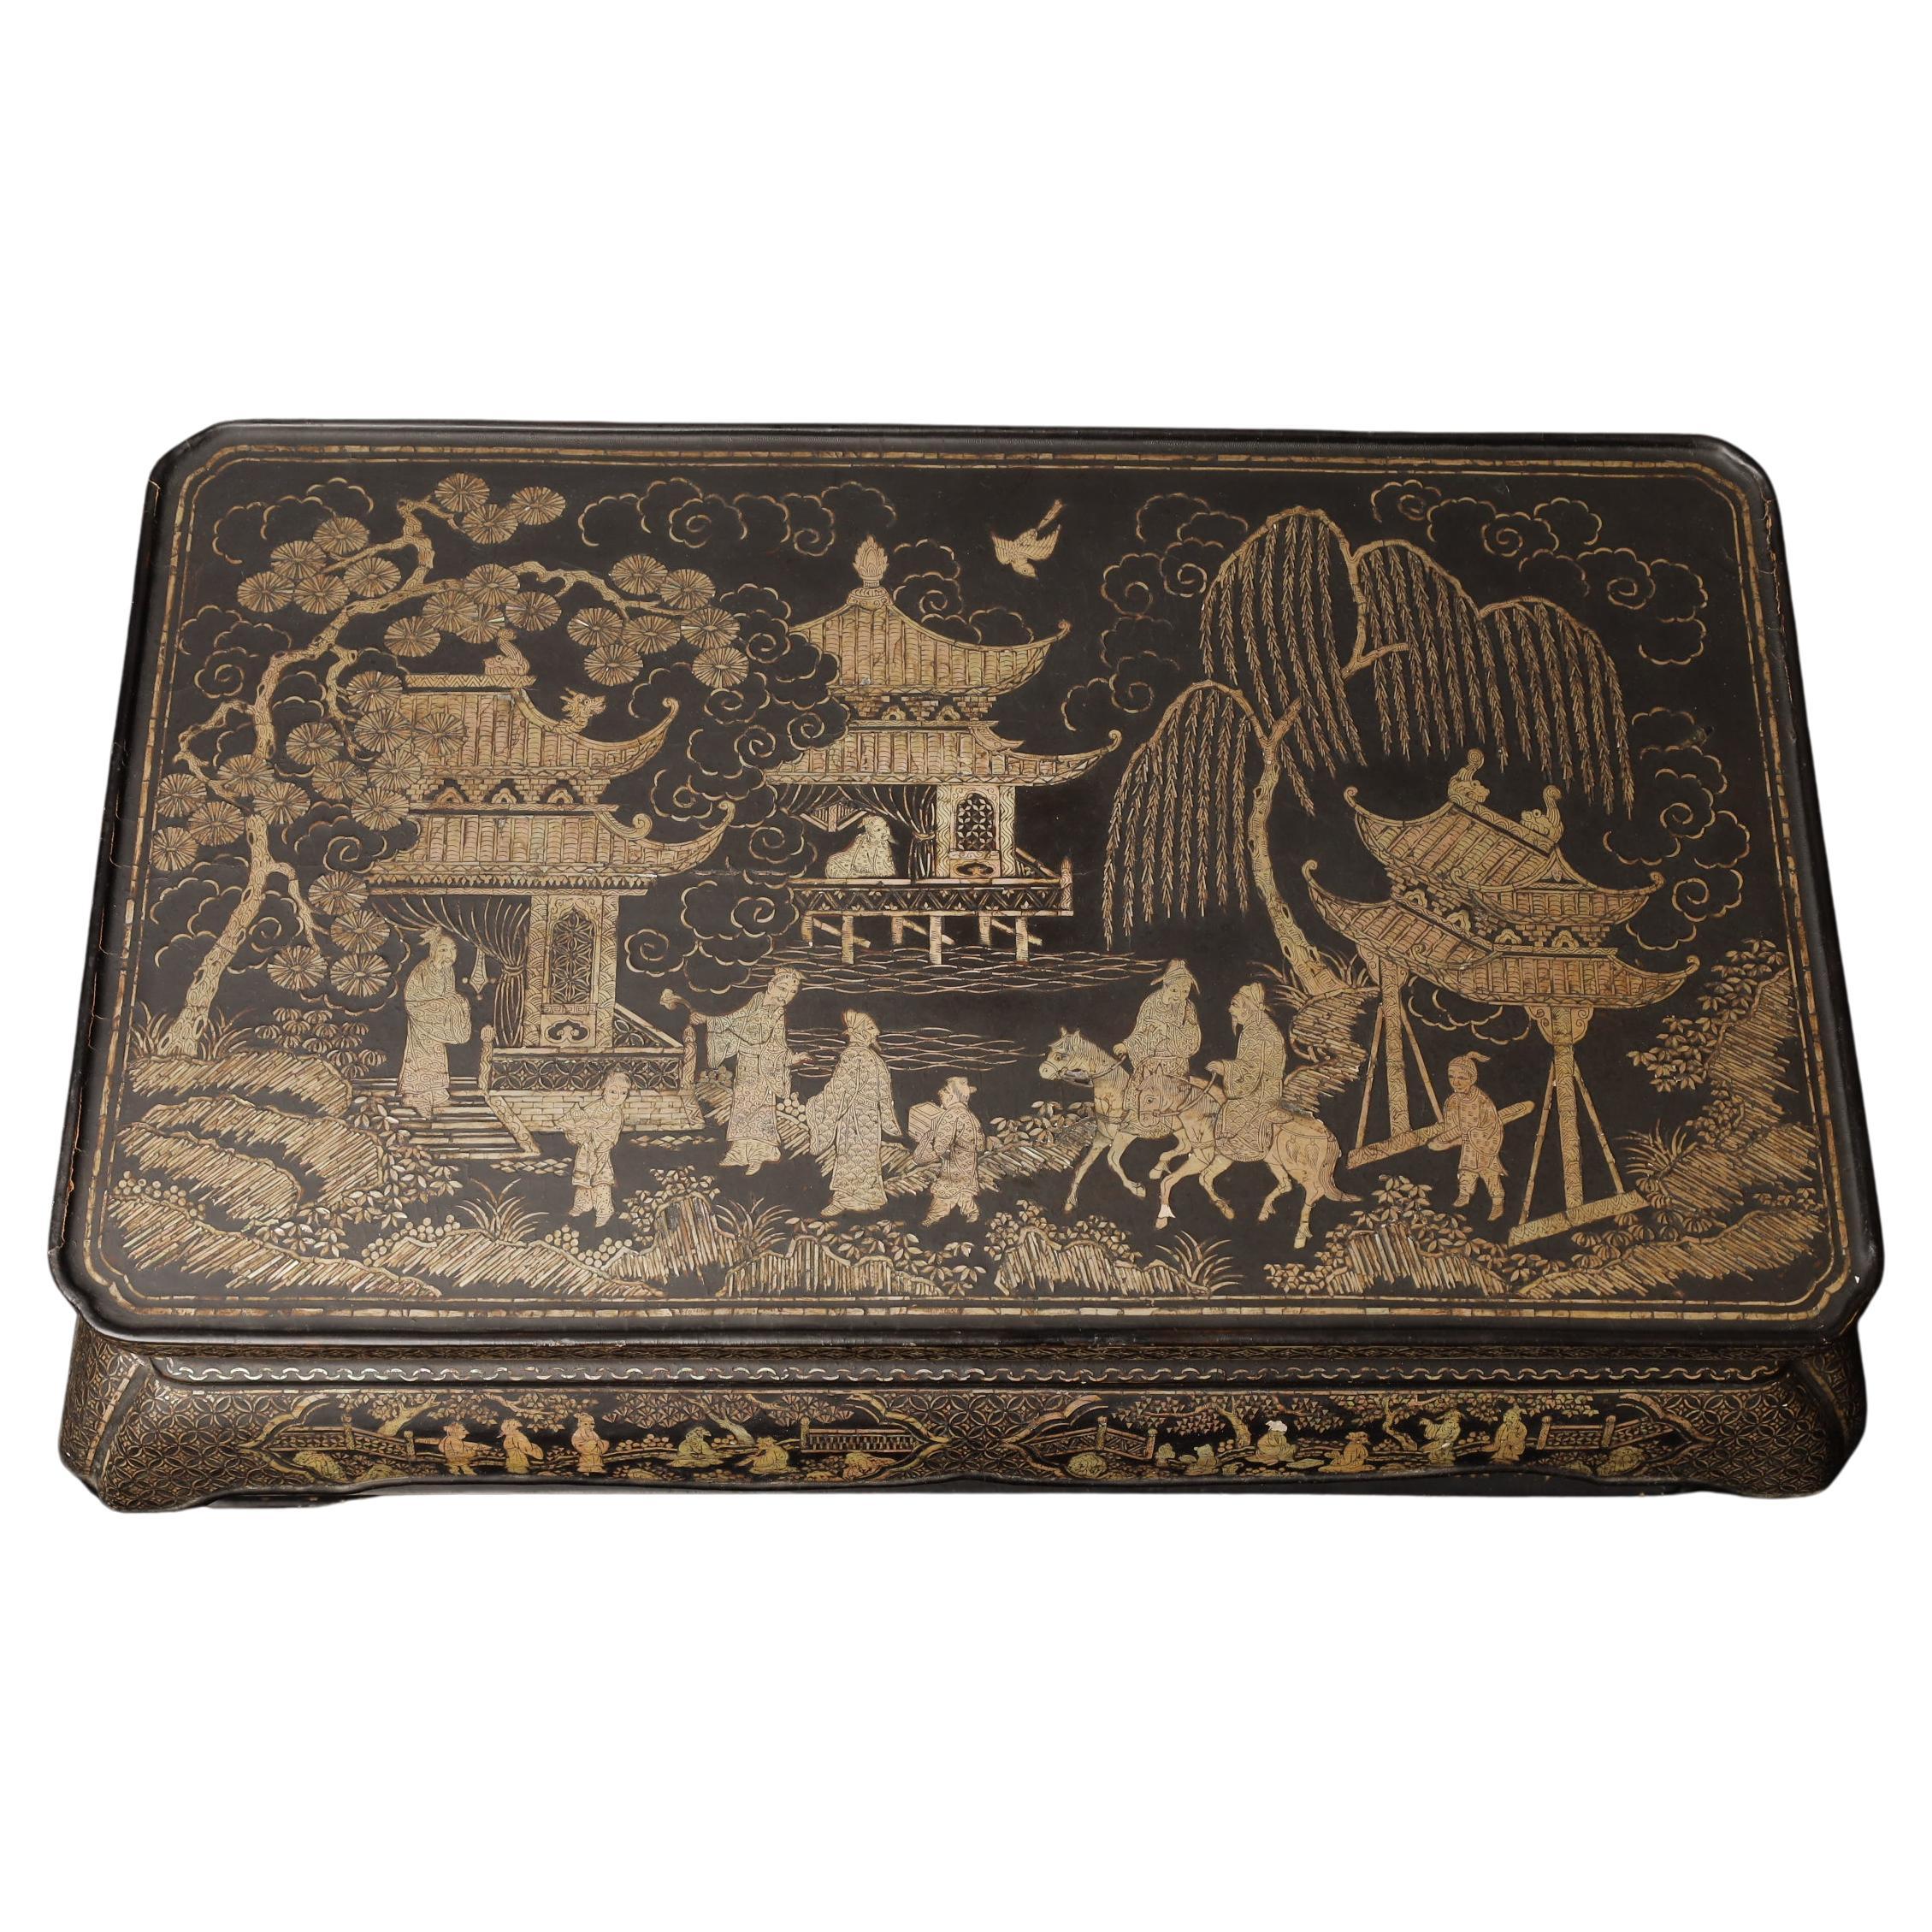 Ming Dynasty Period Scholar's Garden: Mother-of-Pearl Inlaid Lacquer Kang Table